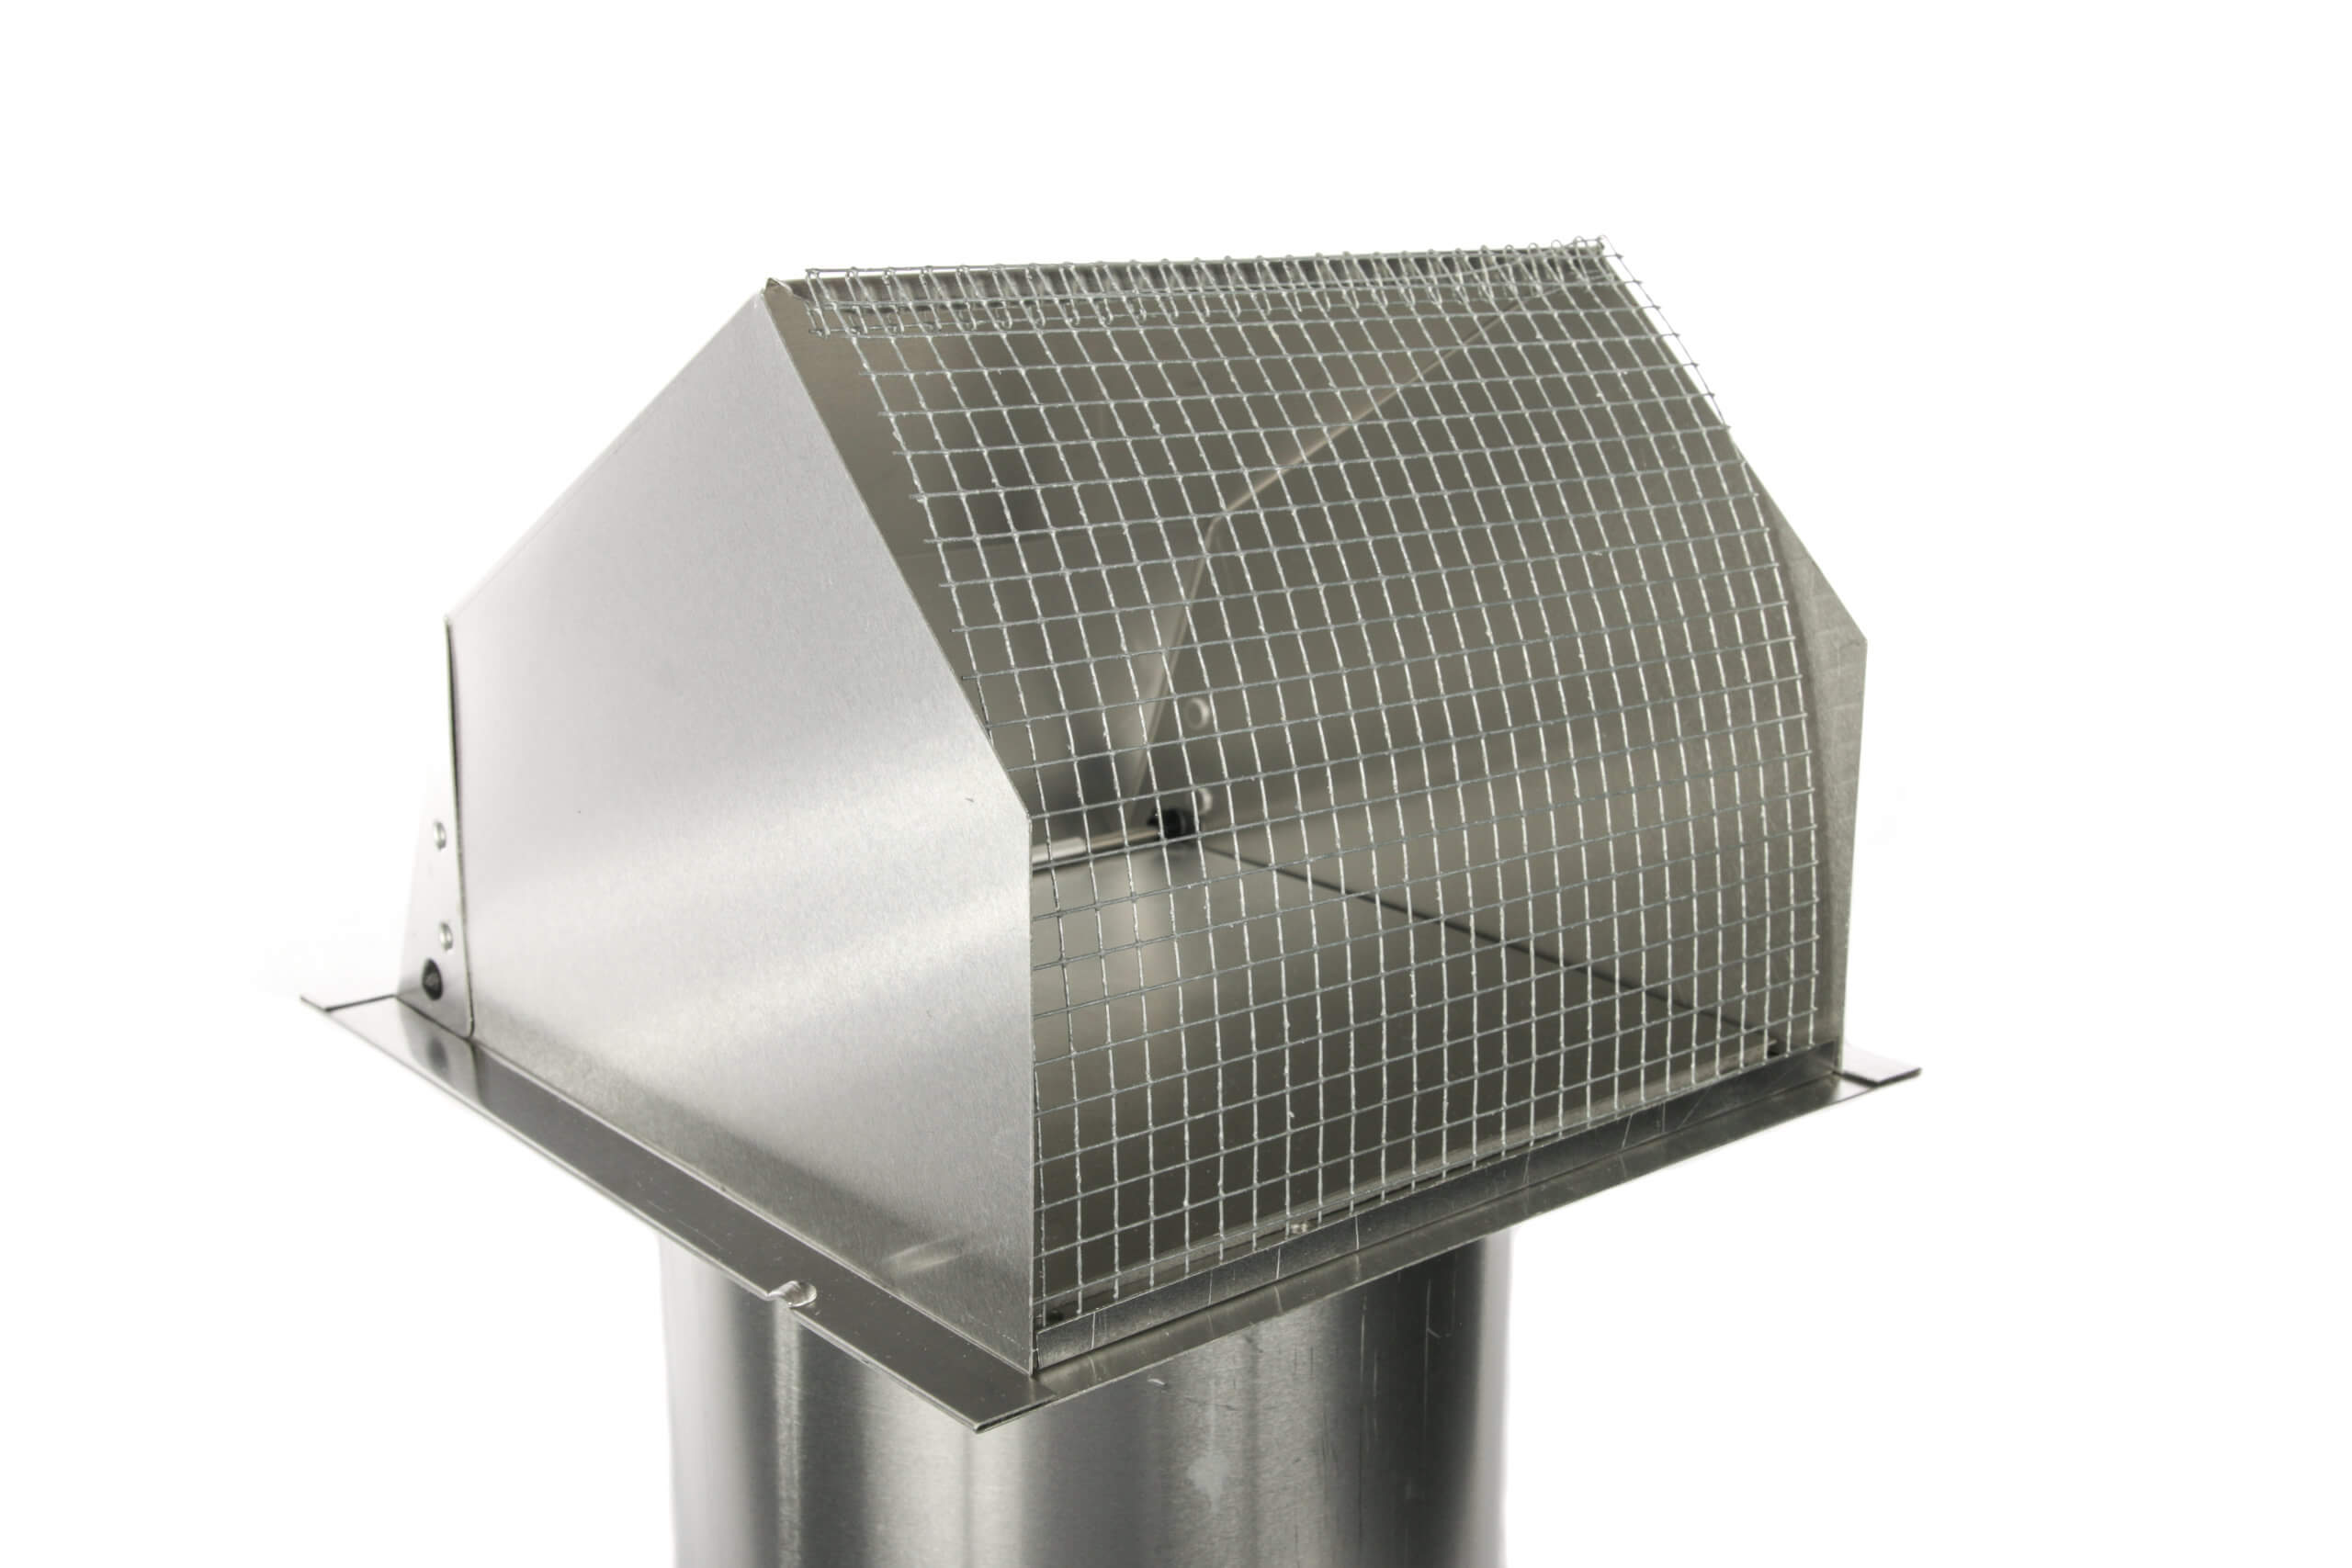 rubber seal / 4" Wall-mounted Air Intake / Exhaust Vent optional HOOD 8" /